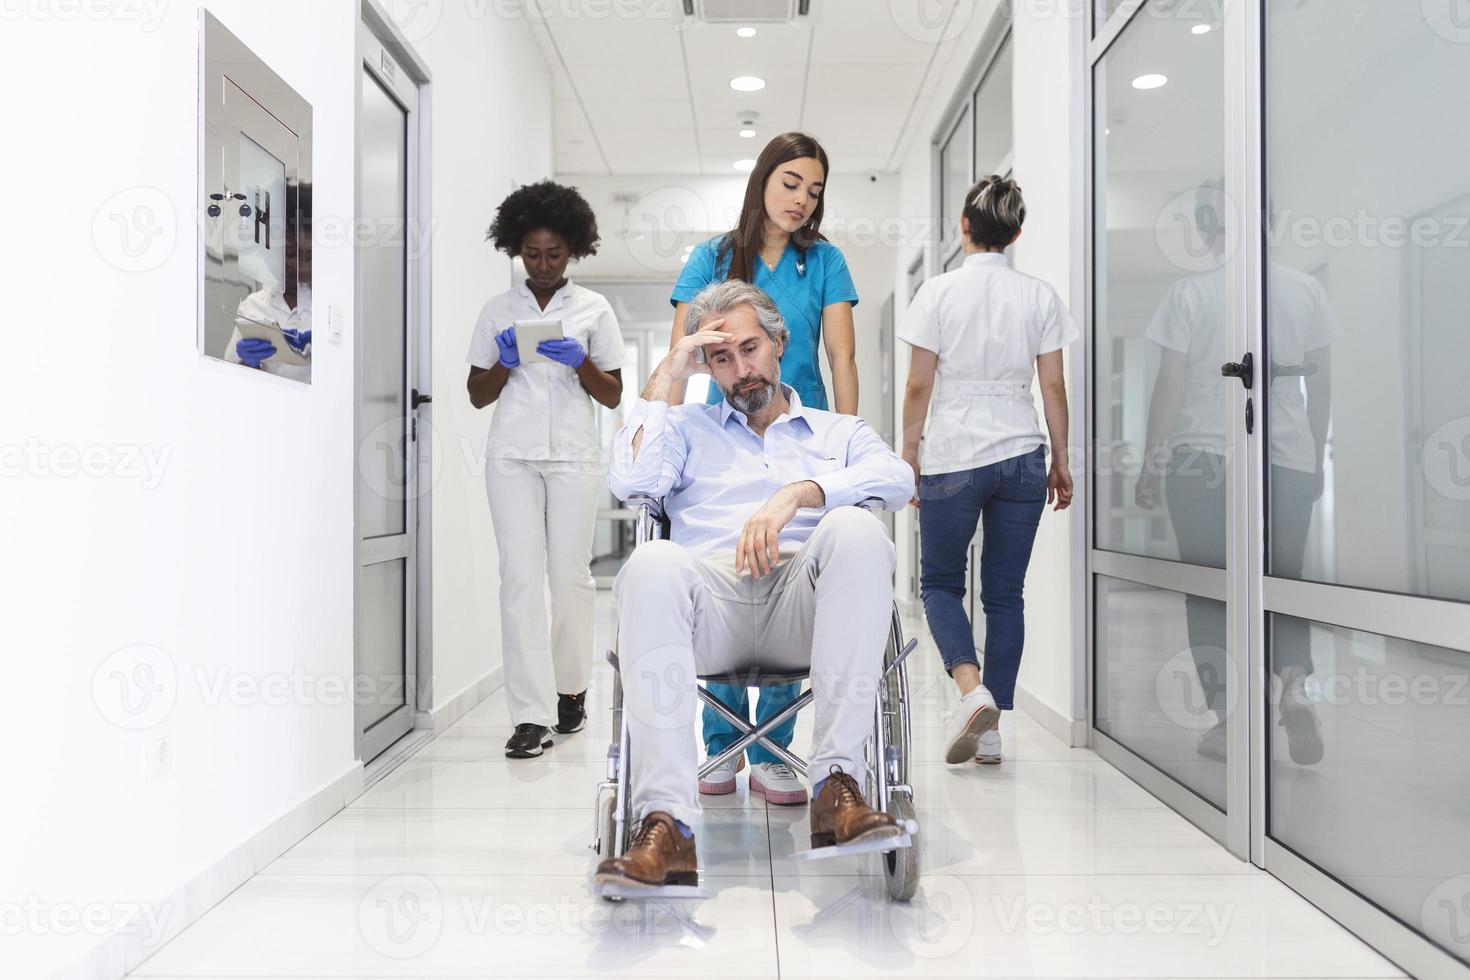 First Floor of the Busy Hospital, Doctors, Nurses and Personnel Busy Working, Assistant Moves Elderly Man in the Wheelchair. New Modern Medical Hospital with Professional Staff. photo